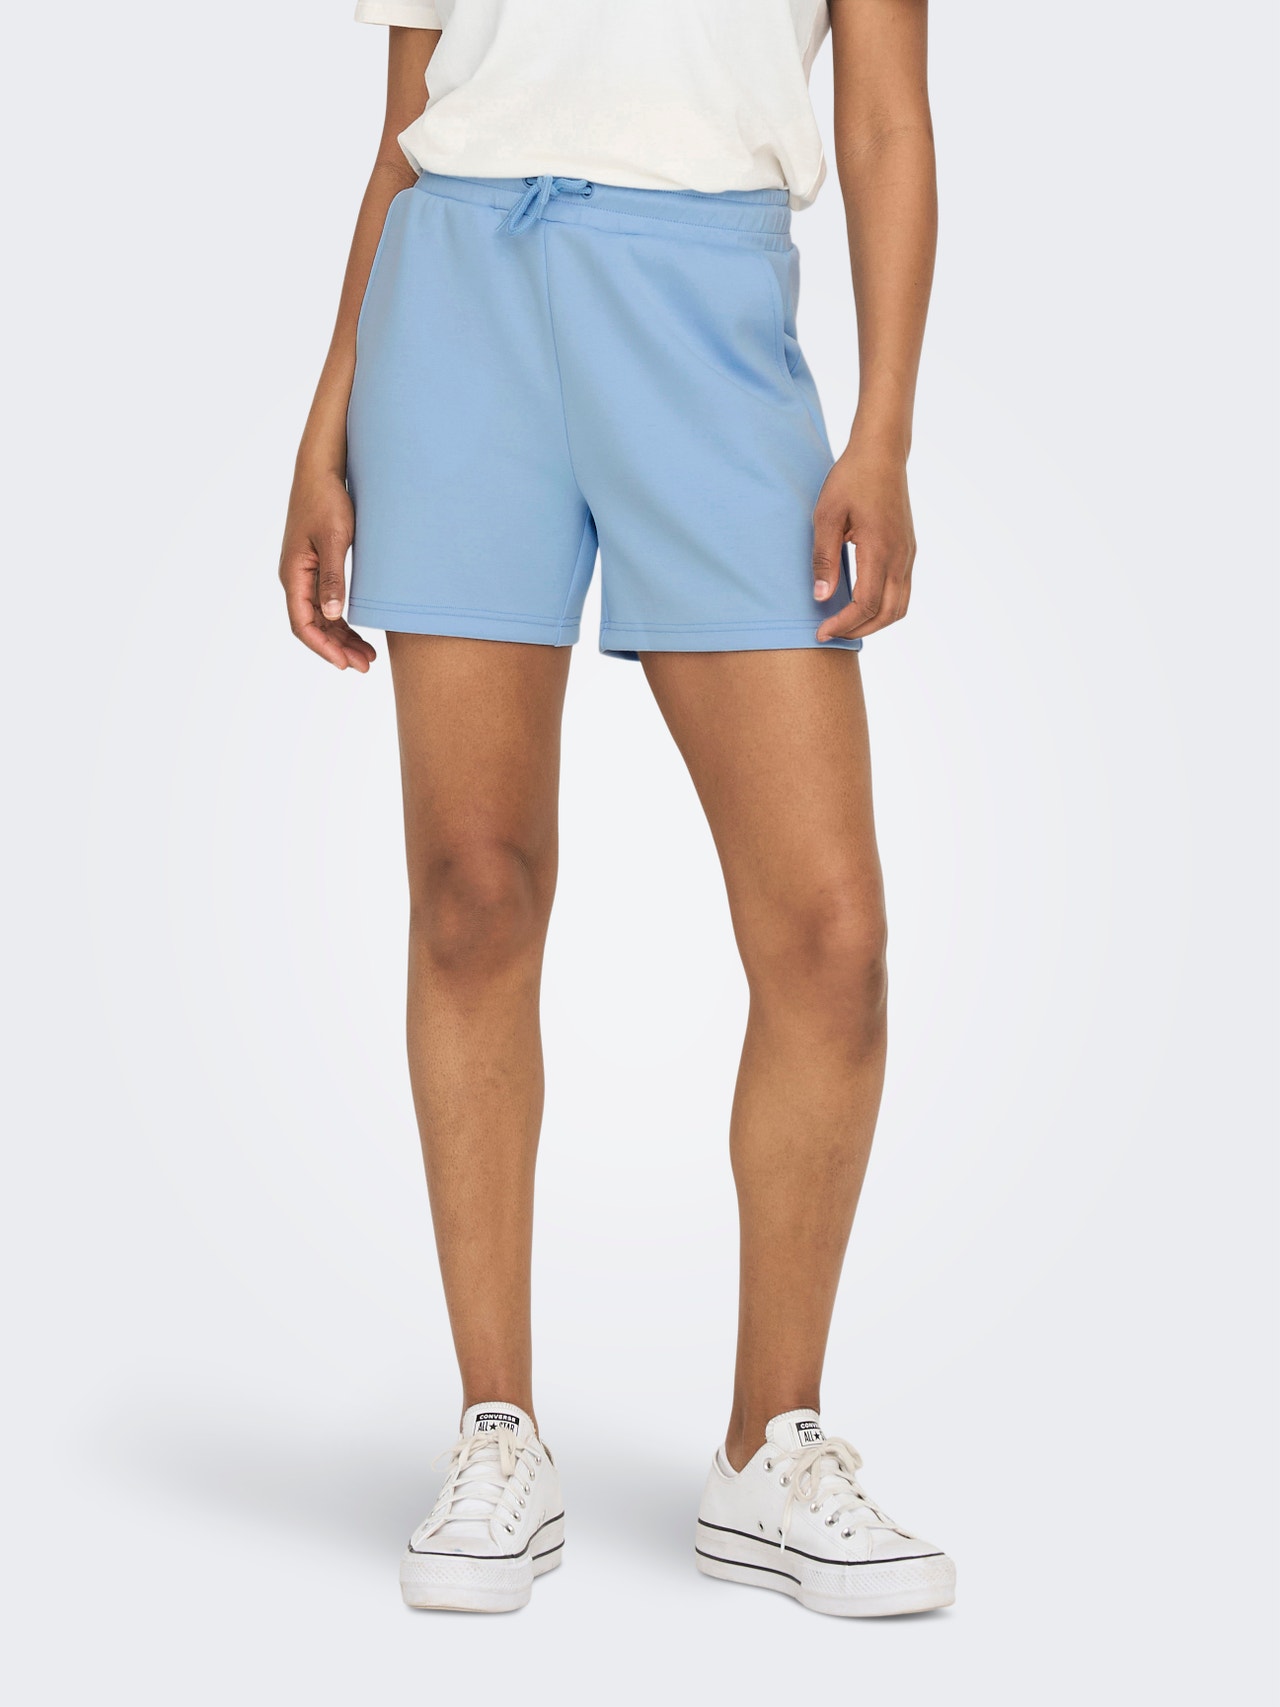 ONLY Loose fit High waist Shorts -Chambray Blue - 15245851